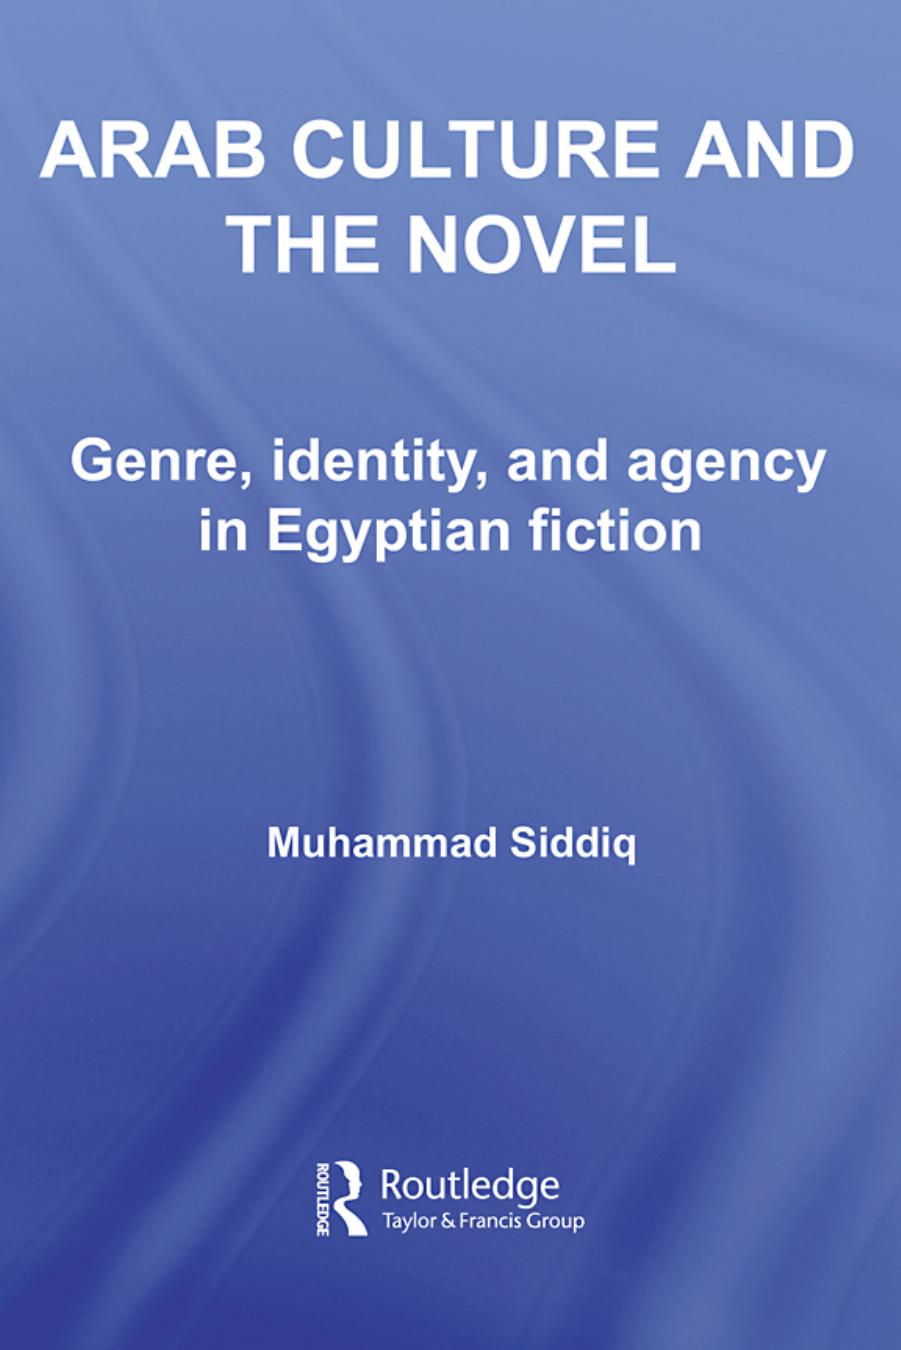 Arab Culture and the Novel: Genre, Identity, and Agency in Egyptian Fiction